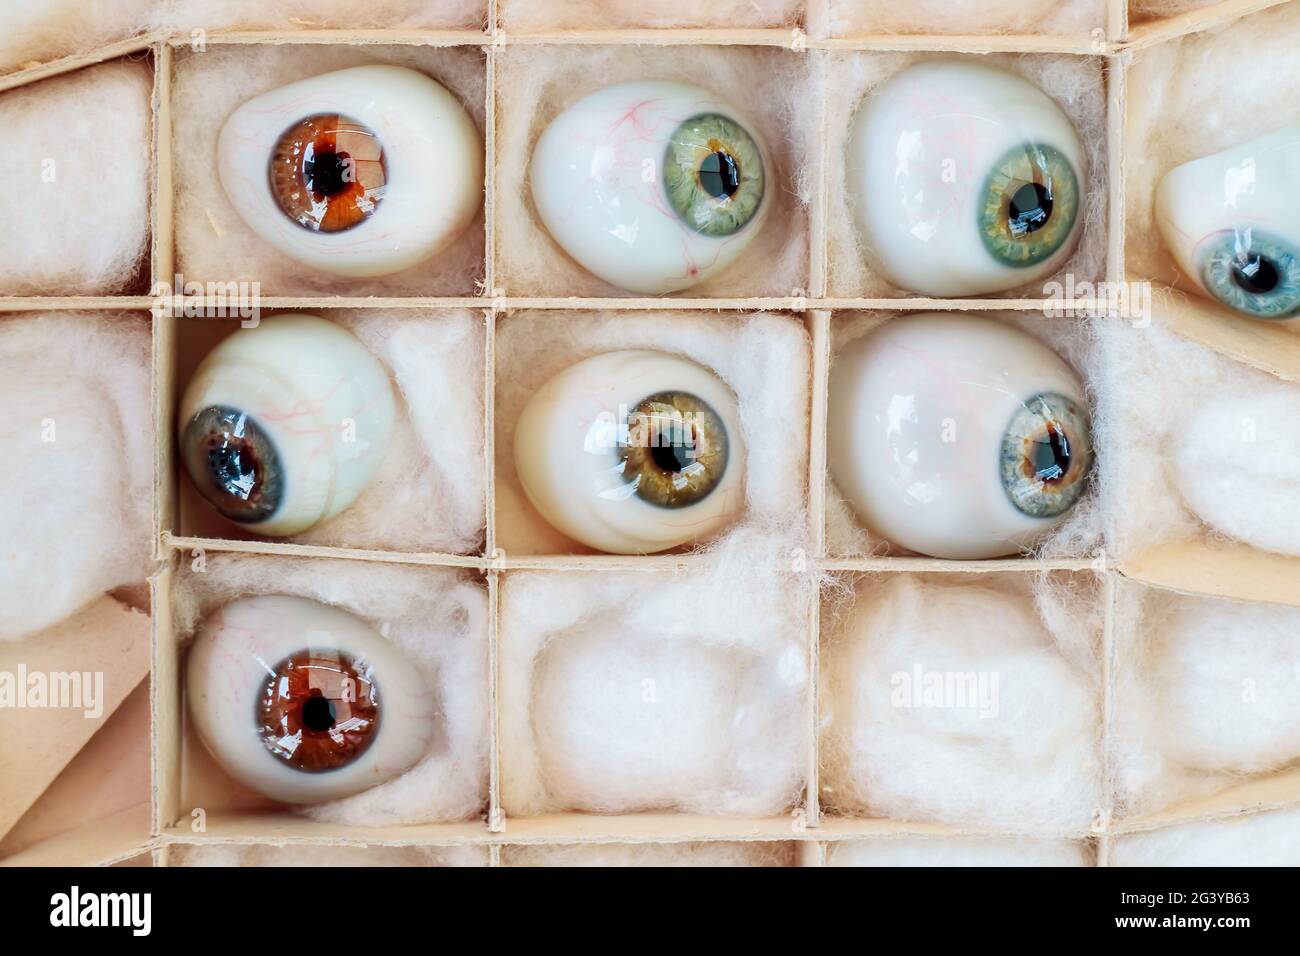 Set of vintage artificial eyes in a box Stock Photo